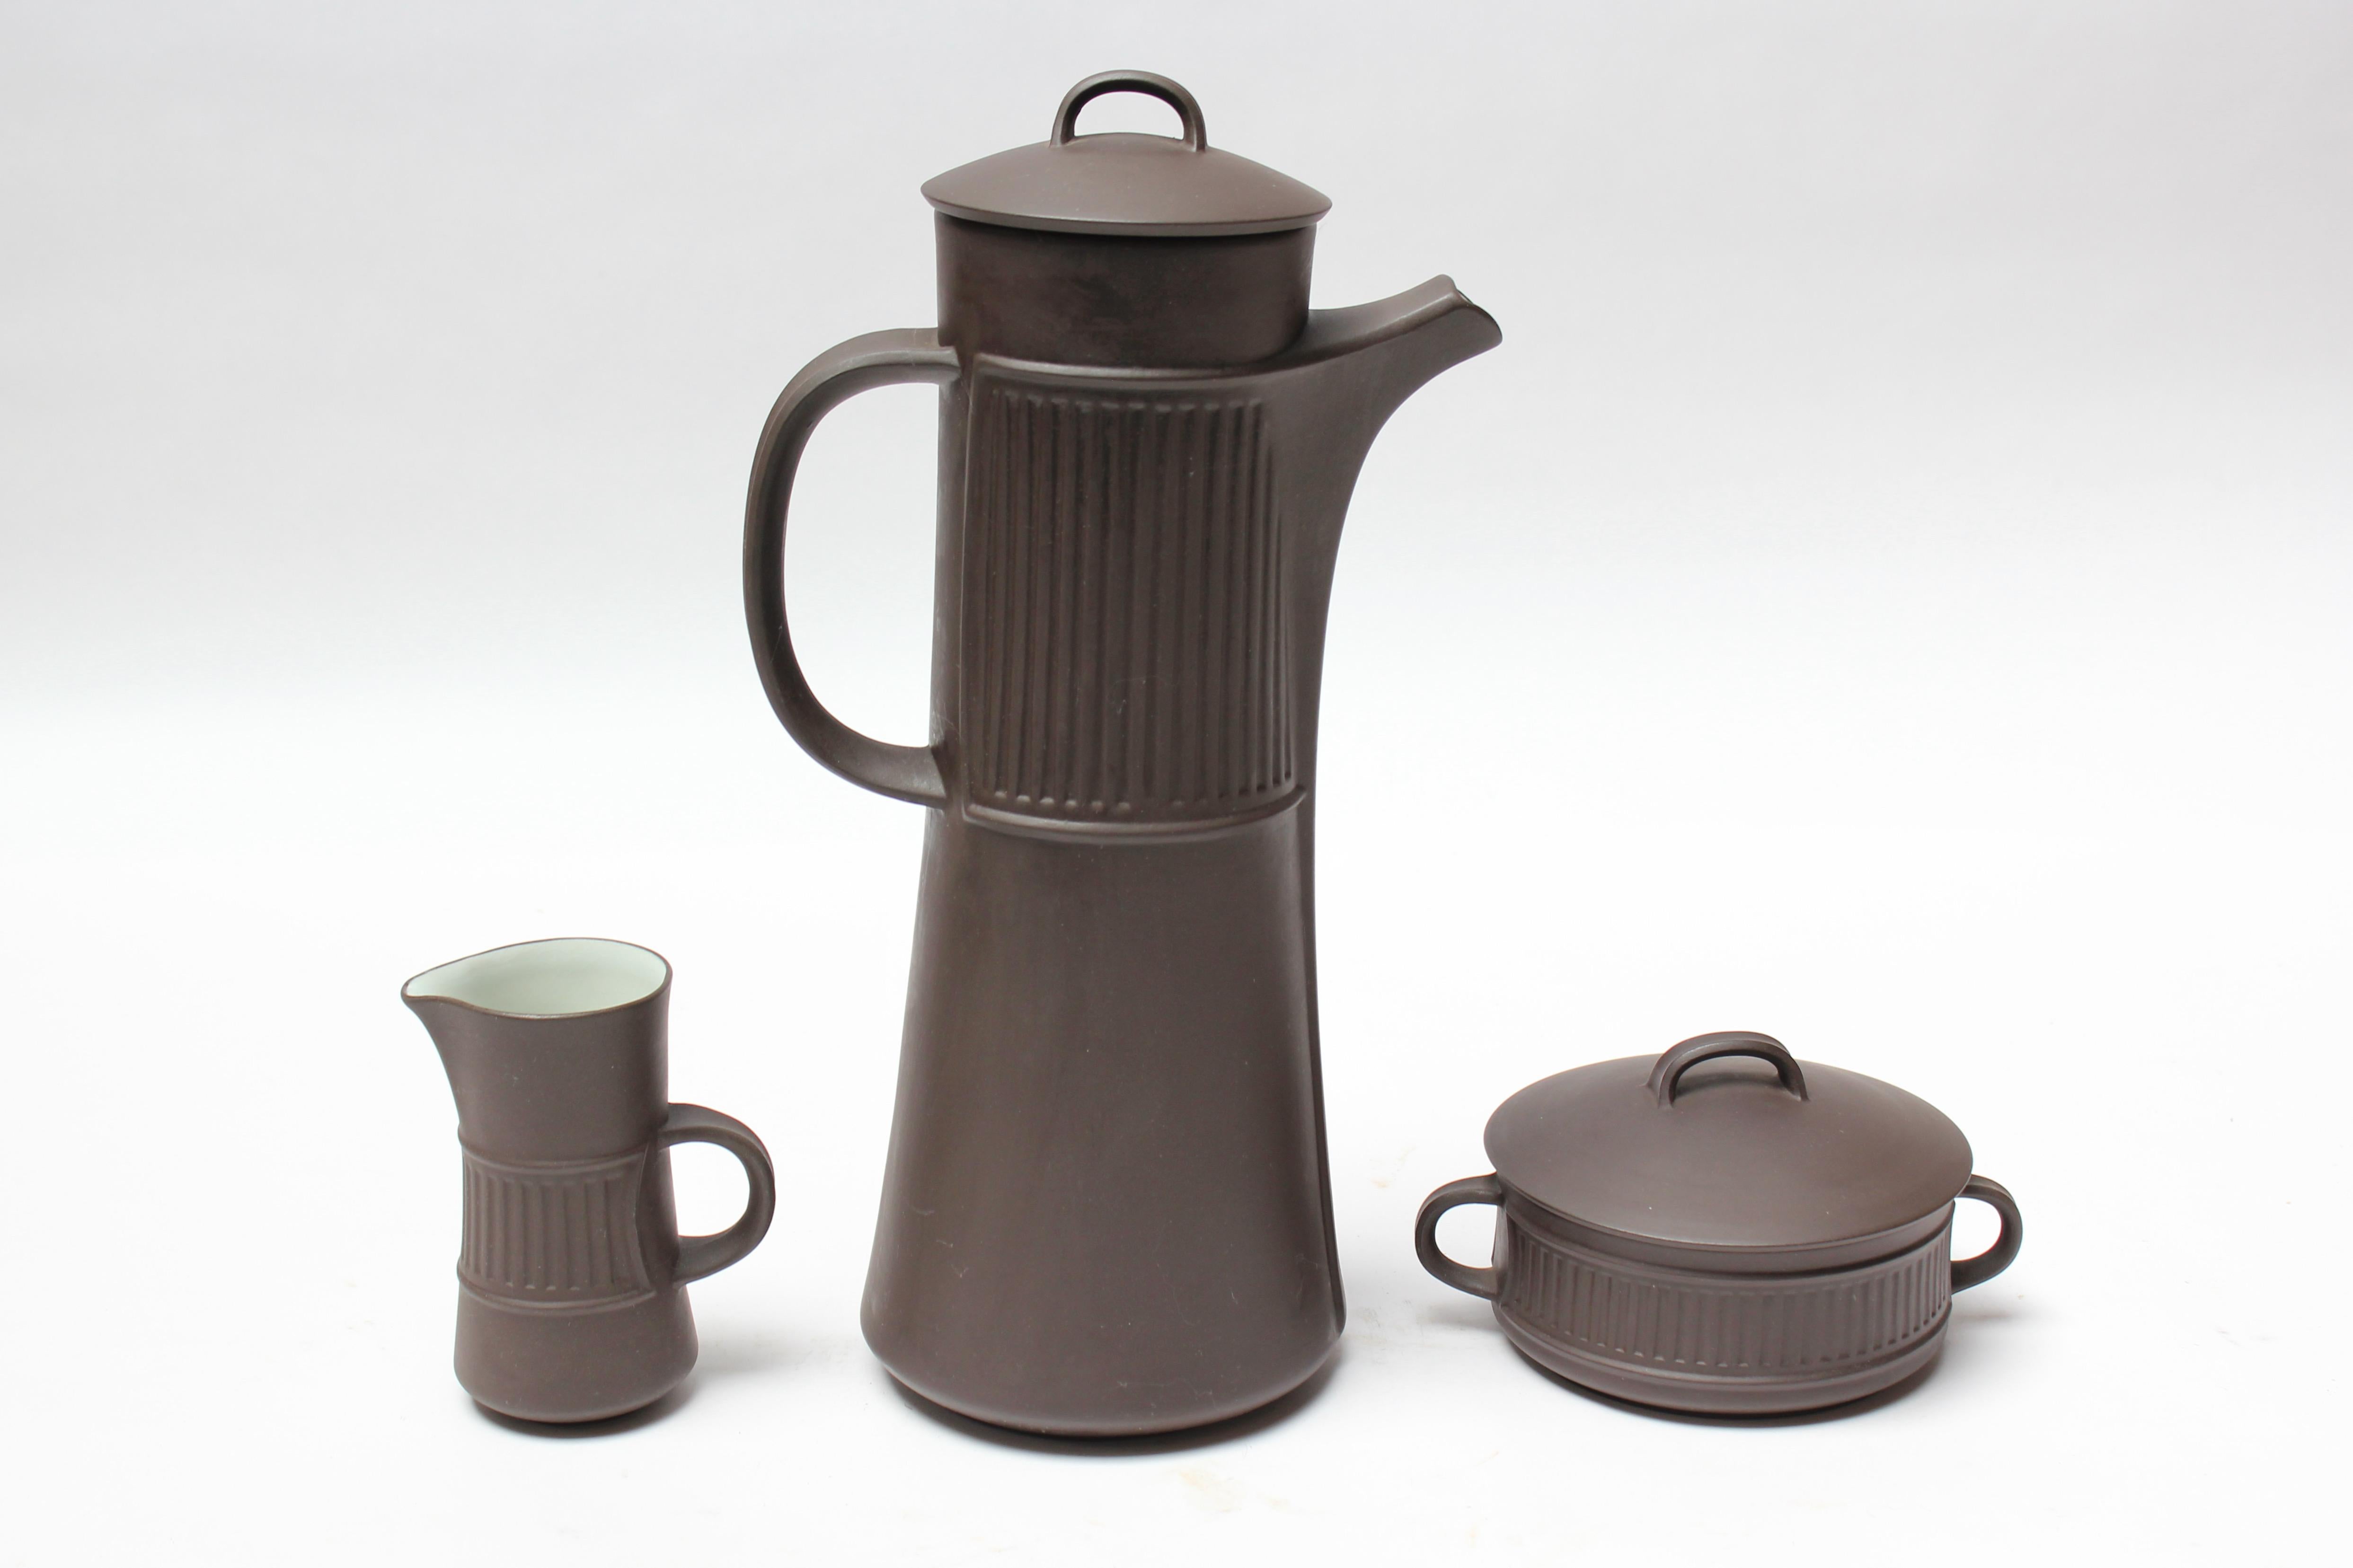 Denmark 'Flamestone' coffee or tea pot, creamer, and sugar by Jens H. Quistgaard for Dansk designs, circa 1958-1964.
Features the Flamestone signature slate, almost brown glazed-earthenware with striated pattern and white with a tinge of green